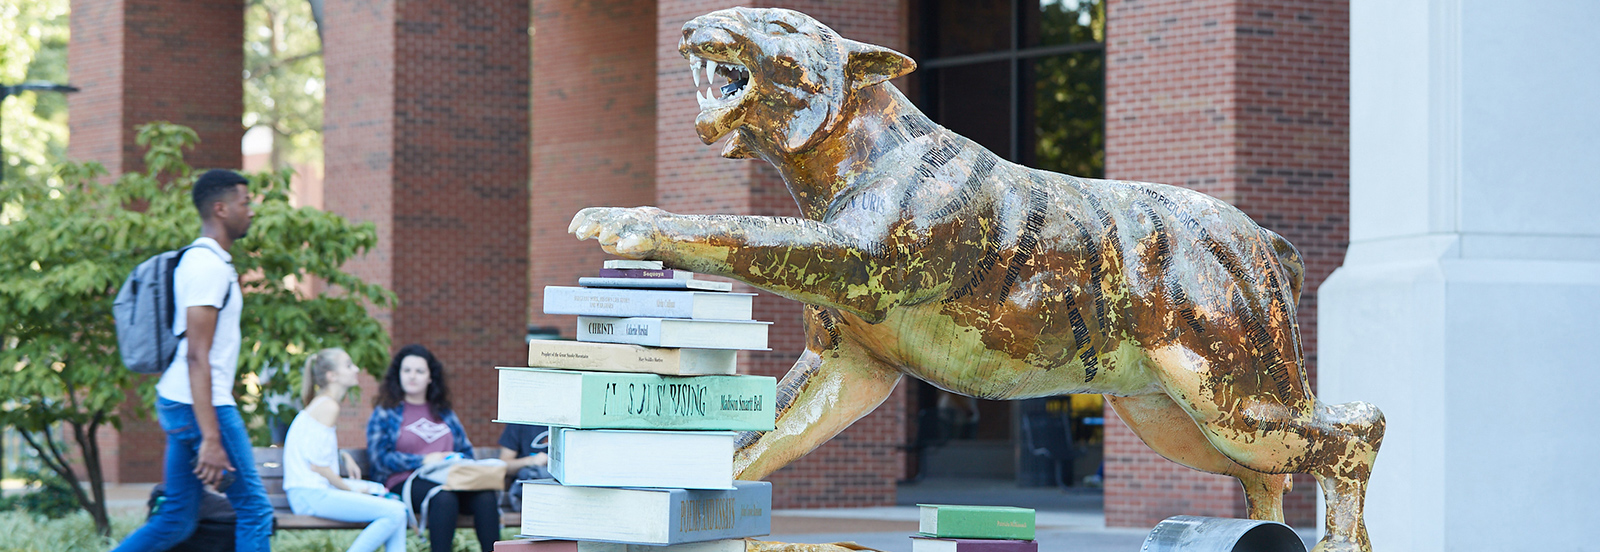 statue of tiger with paw on stack of books